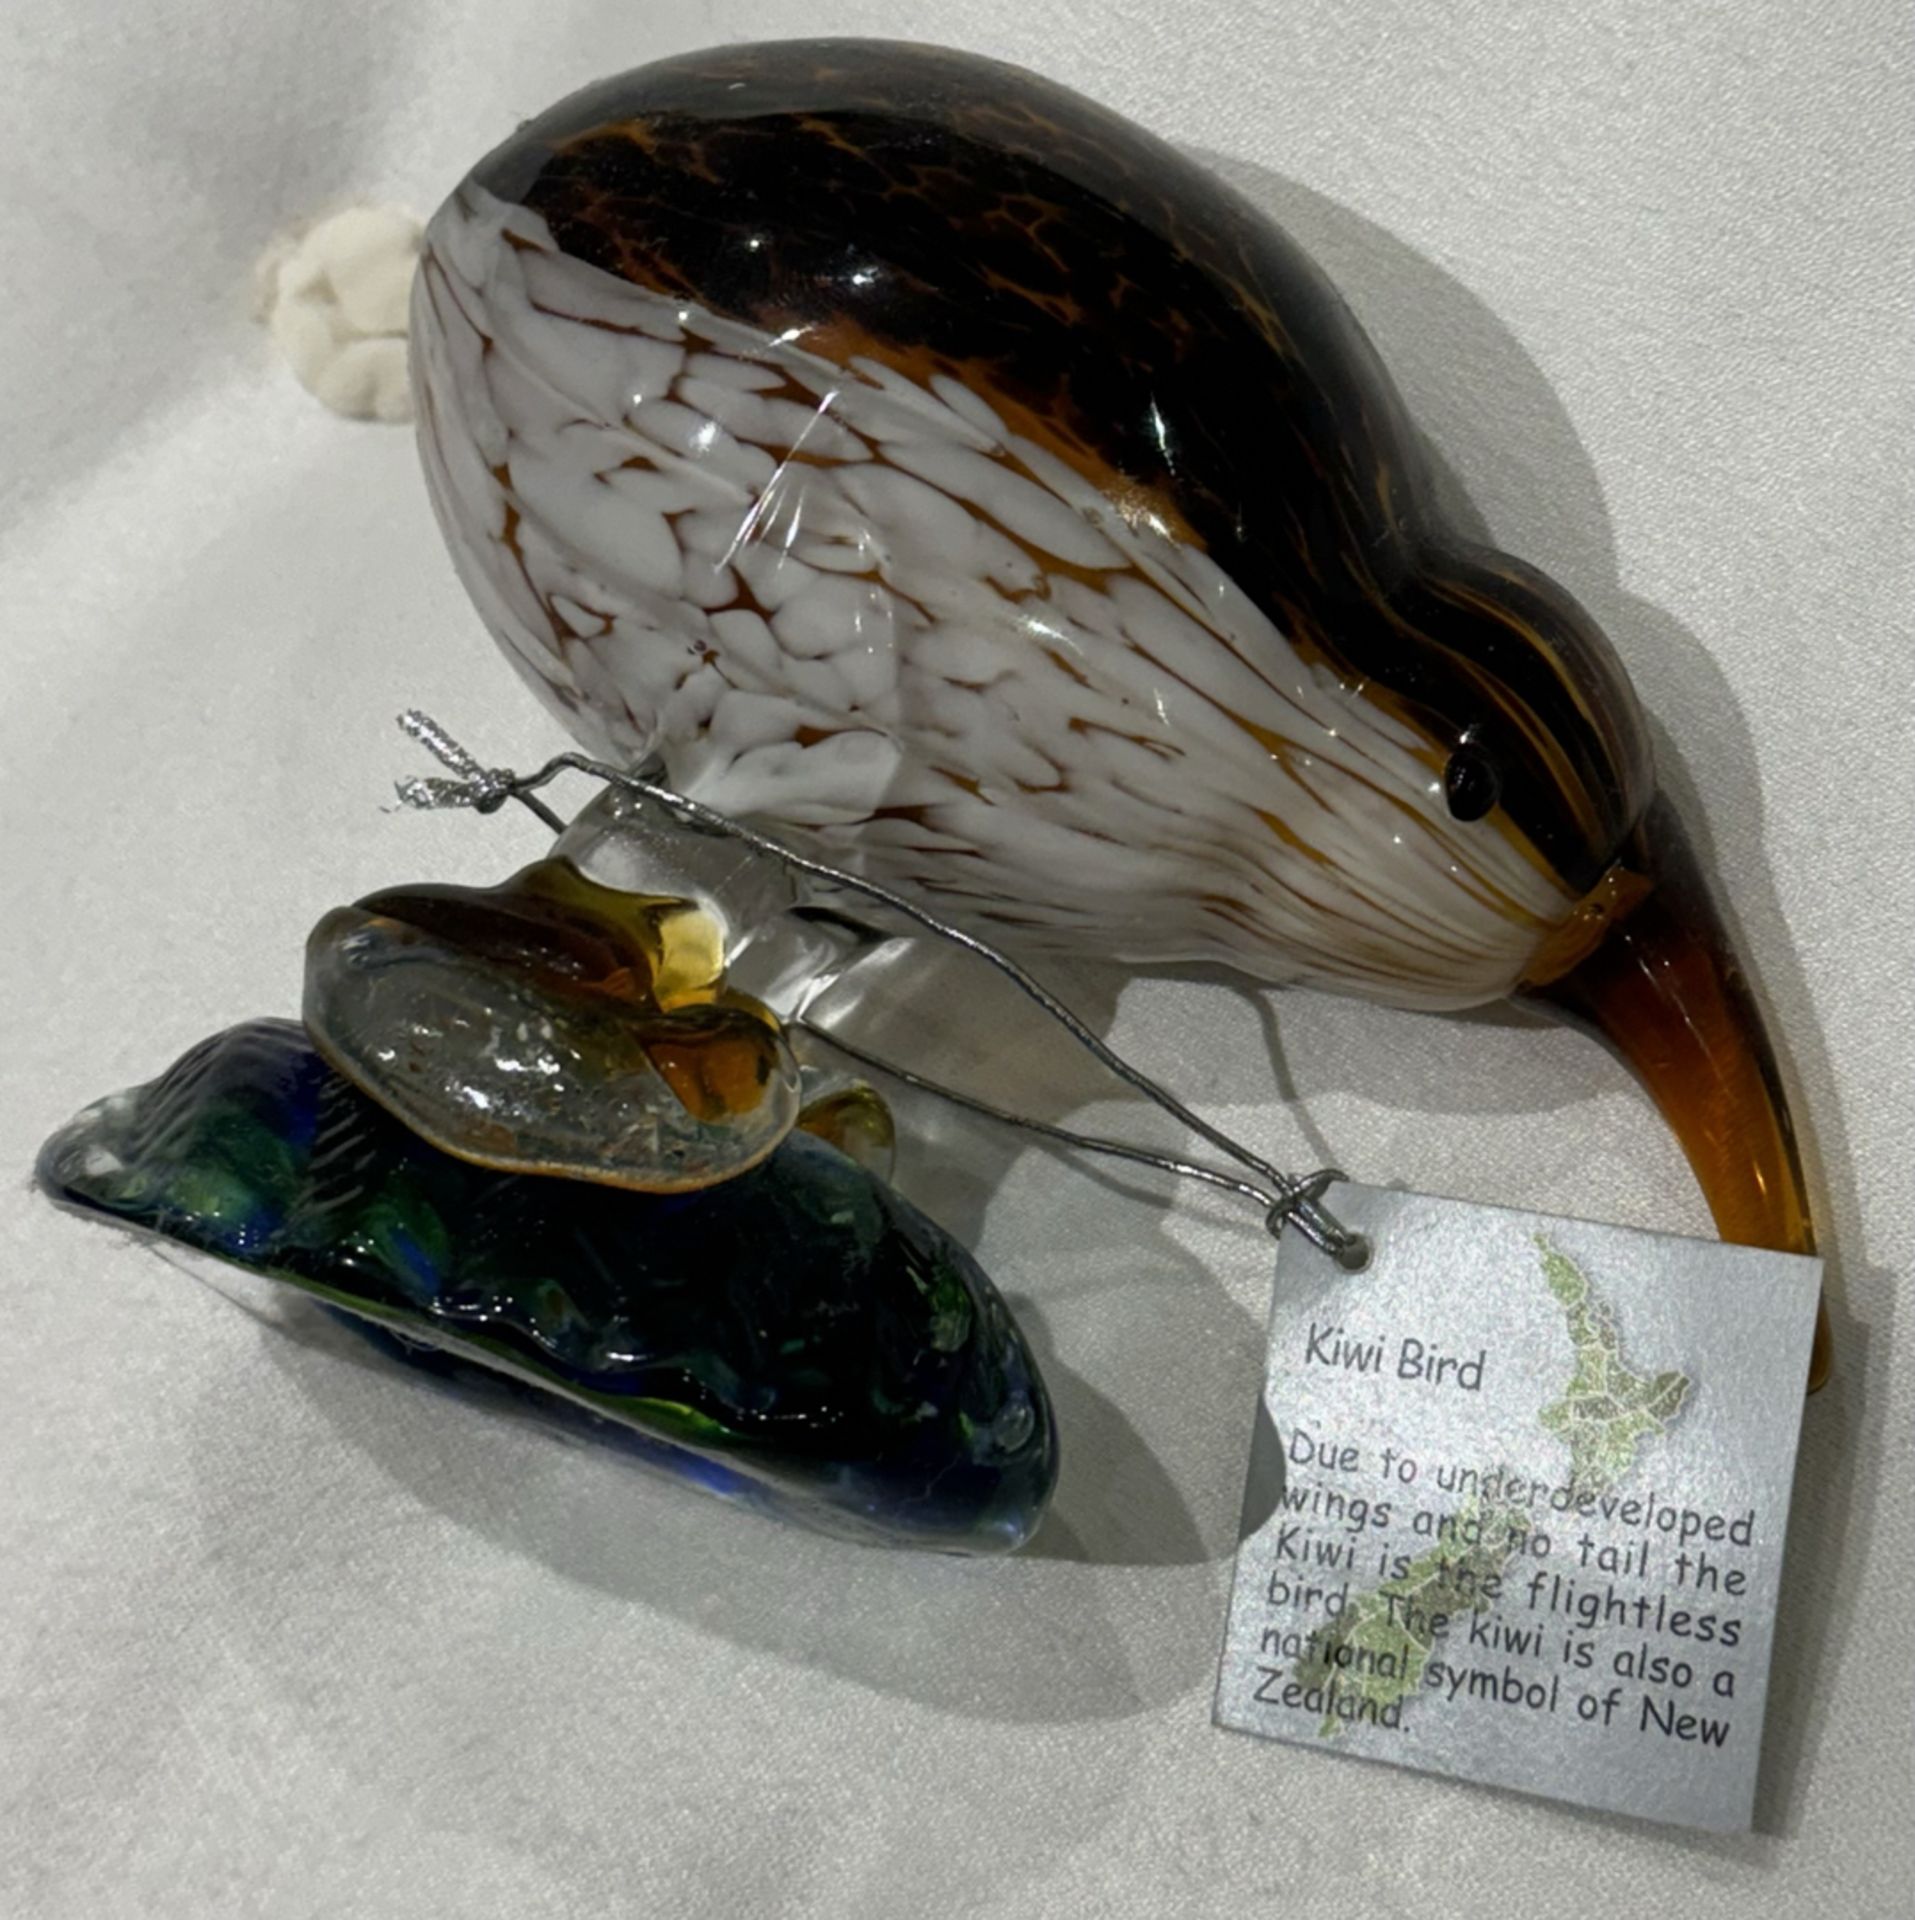 Kiwi Bird Glass Paperweight New Zealand - Brand New with Tag - Image 2 of 3